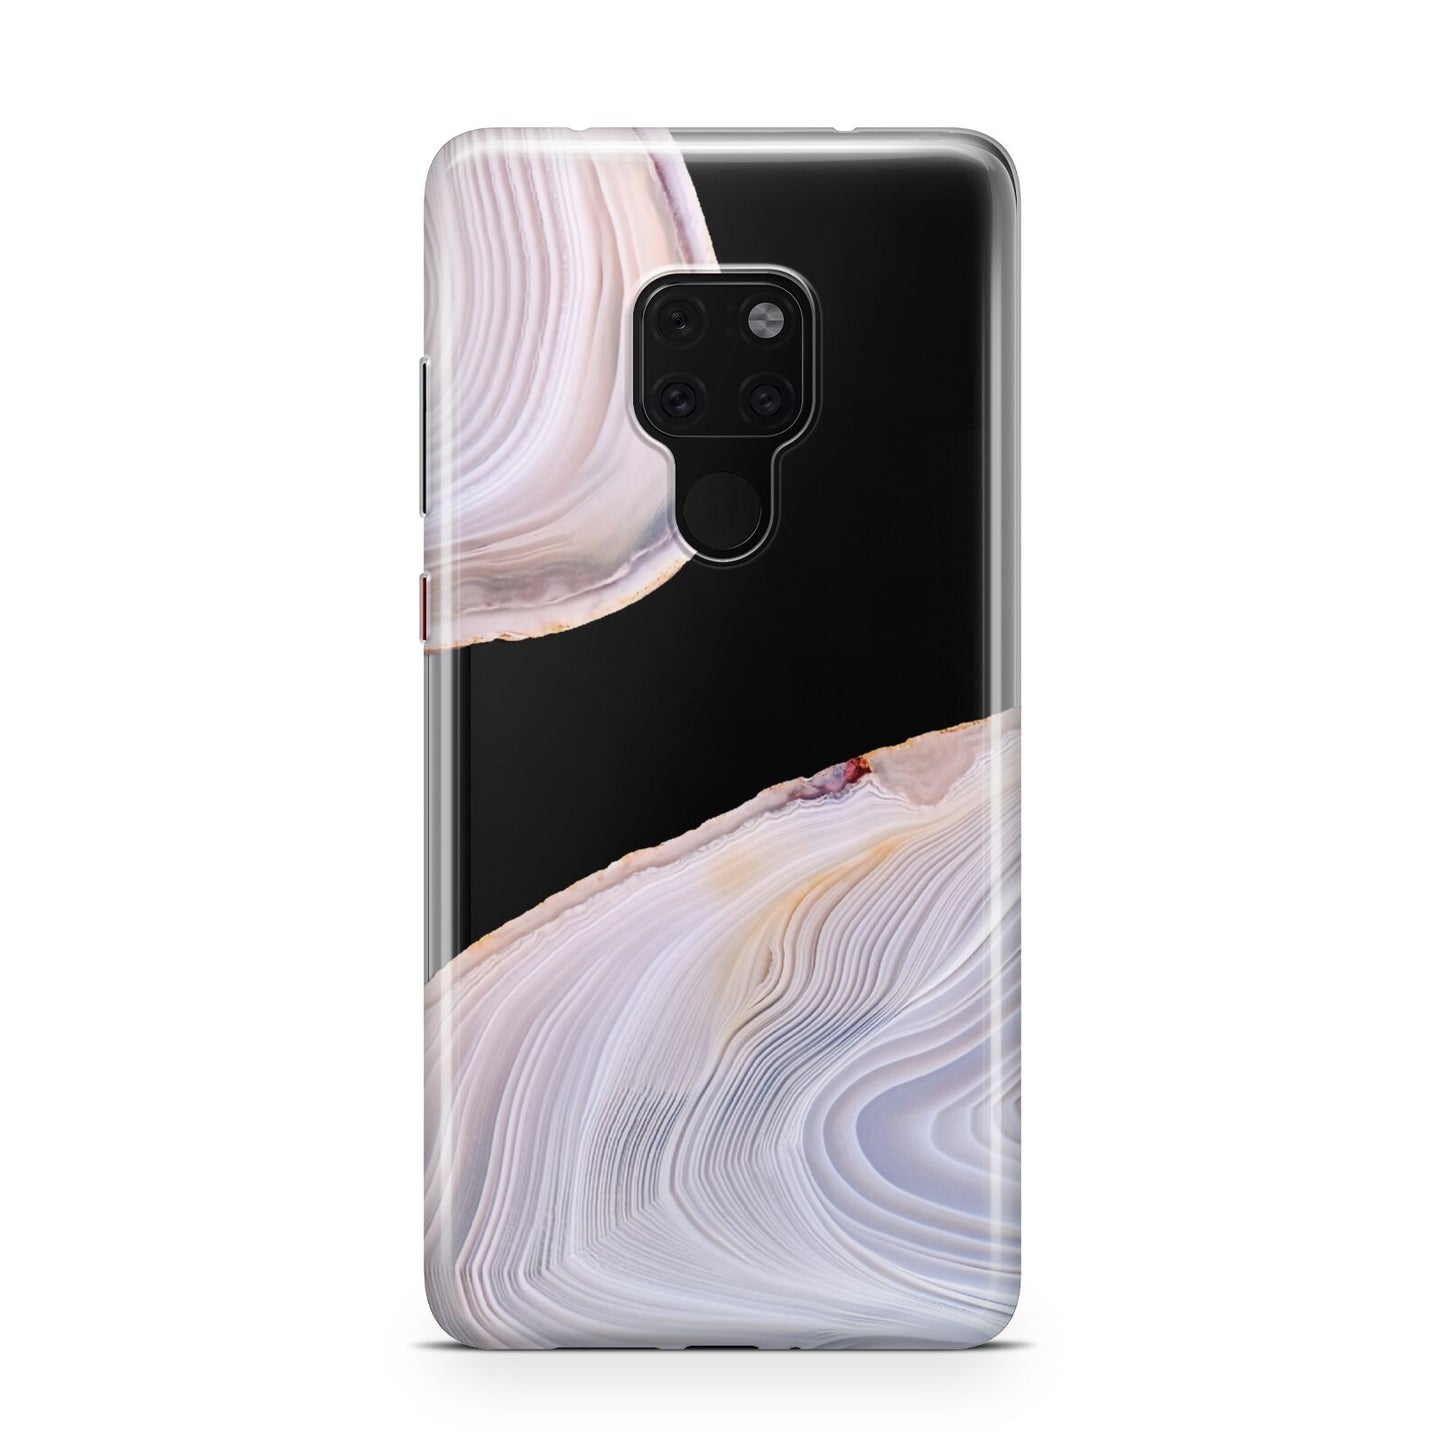 Agate Pale Pink and Blue Huawei Mate 20 Phone Case